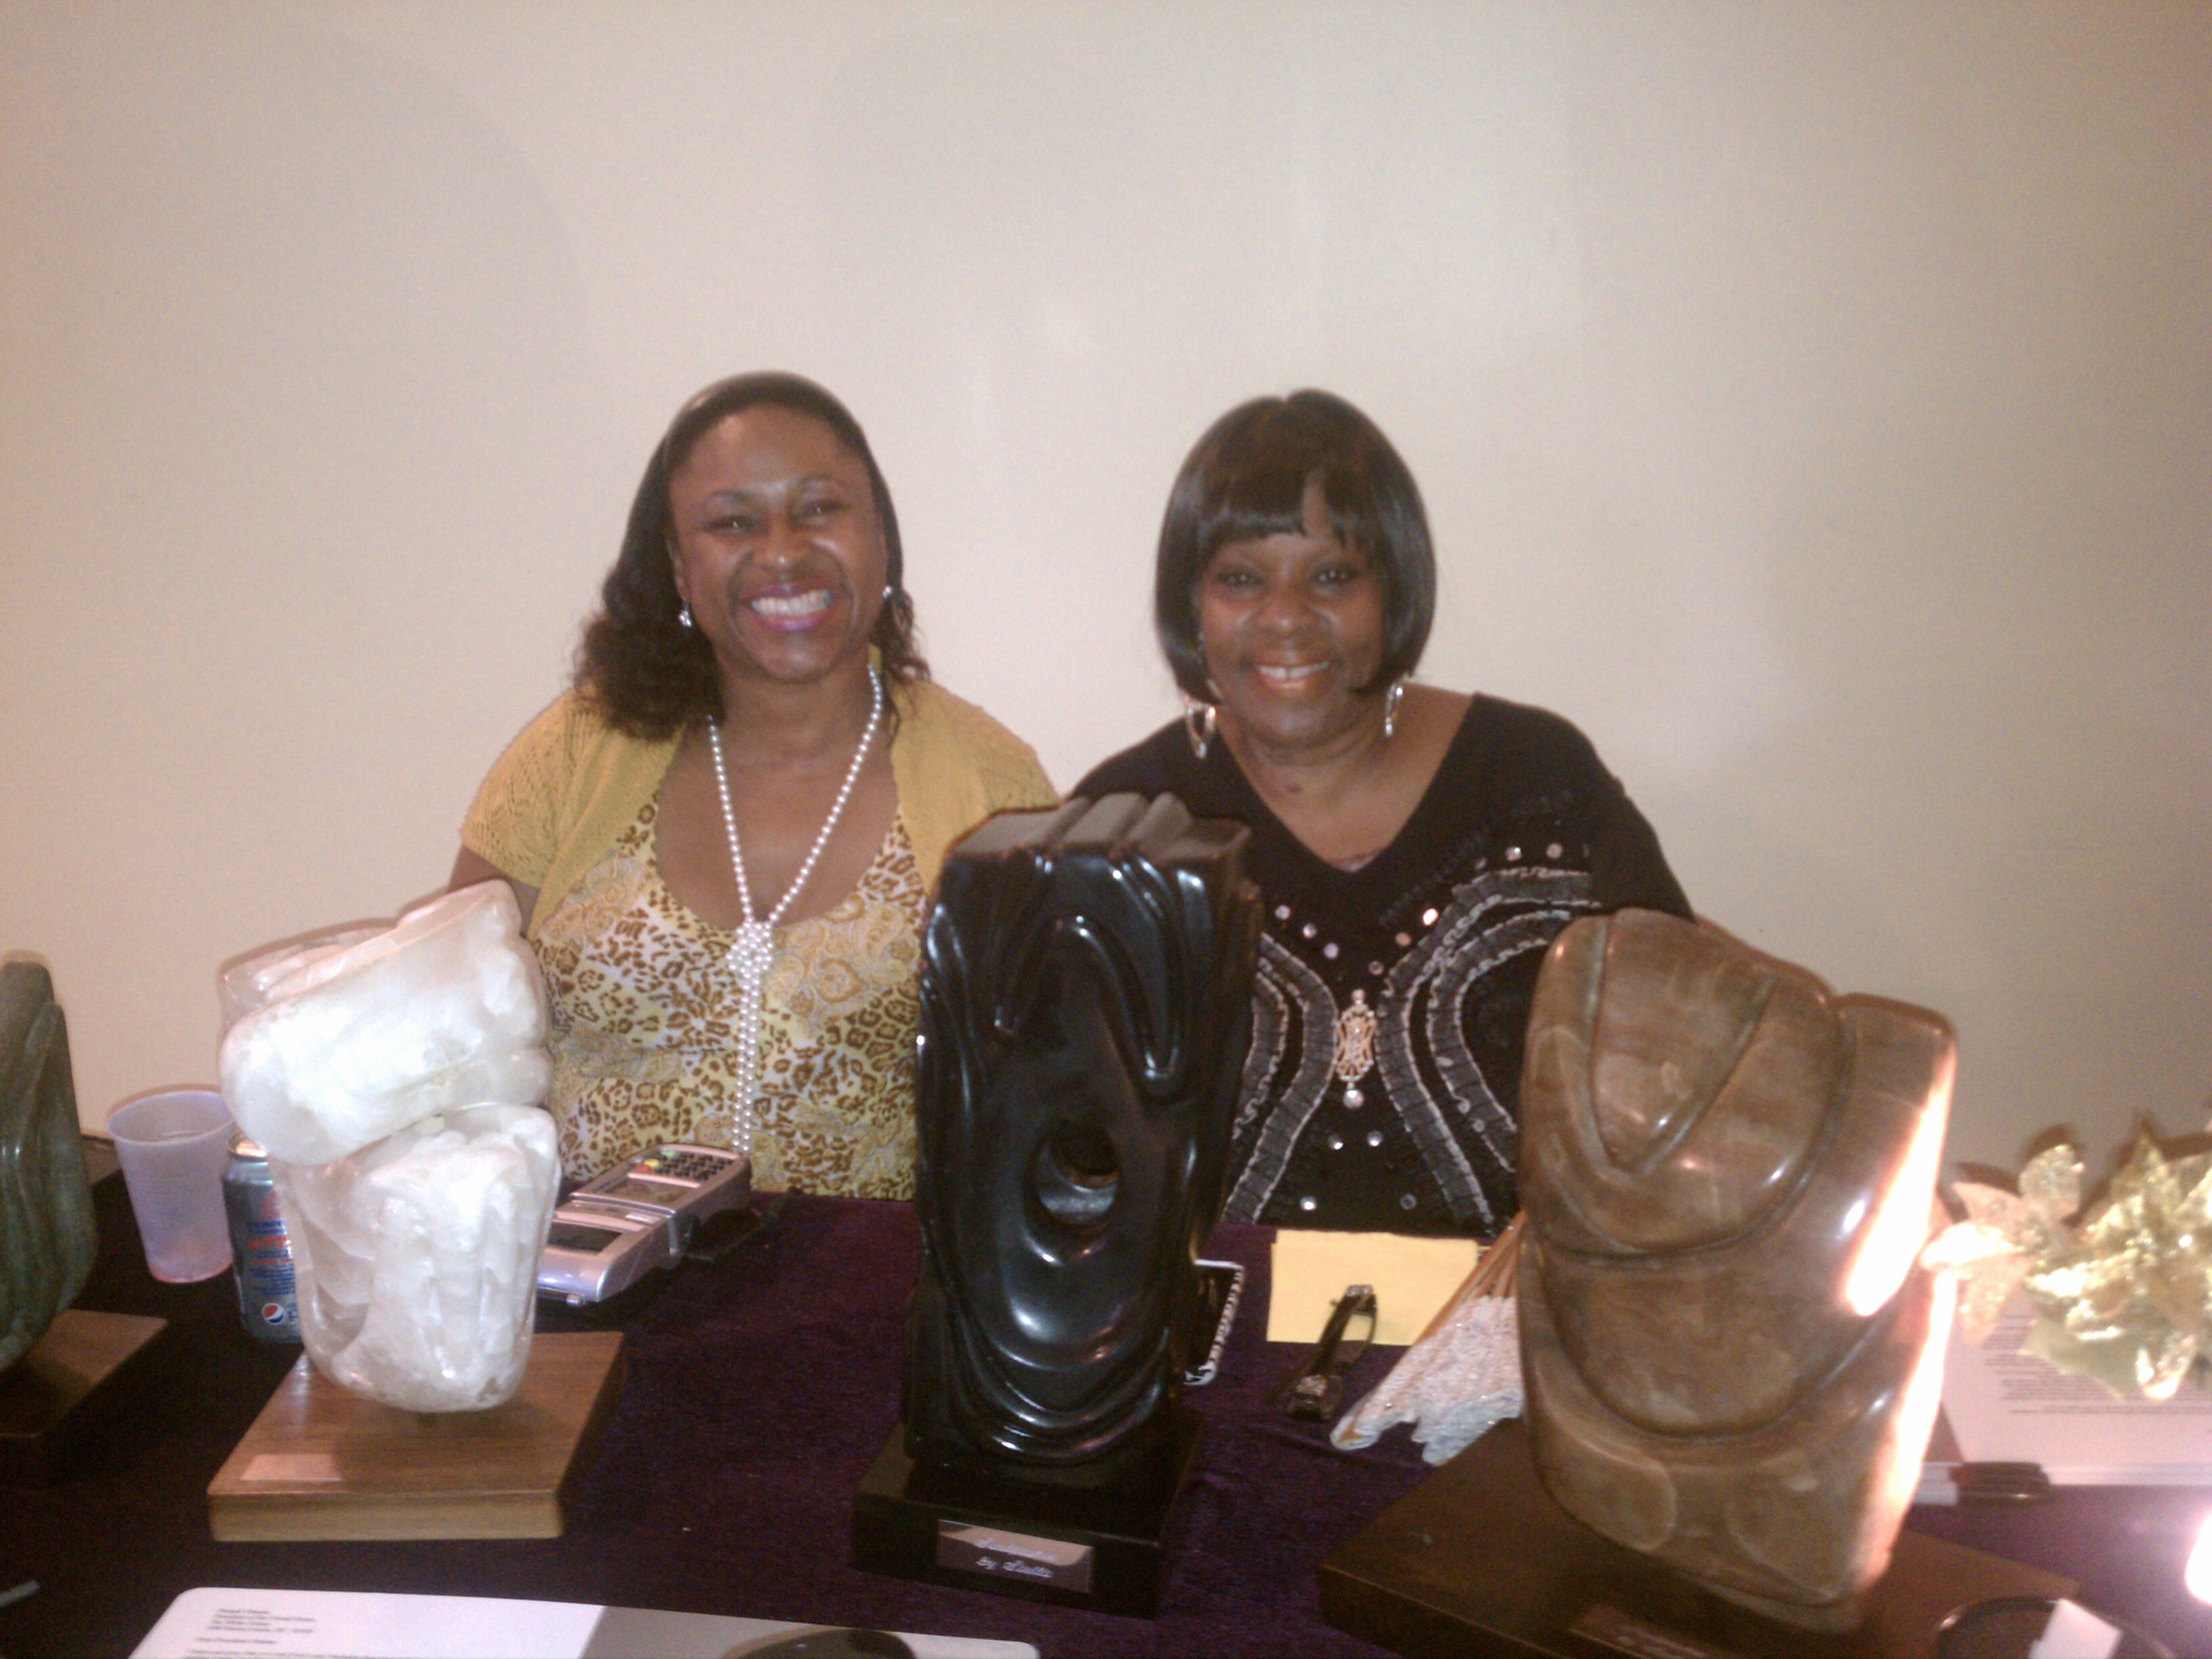 Event sponsor Sculptures by Stella's very own Stella Singleton-Jones with Cathy Taylor and their beautiful sculptures